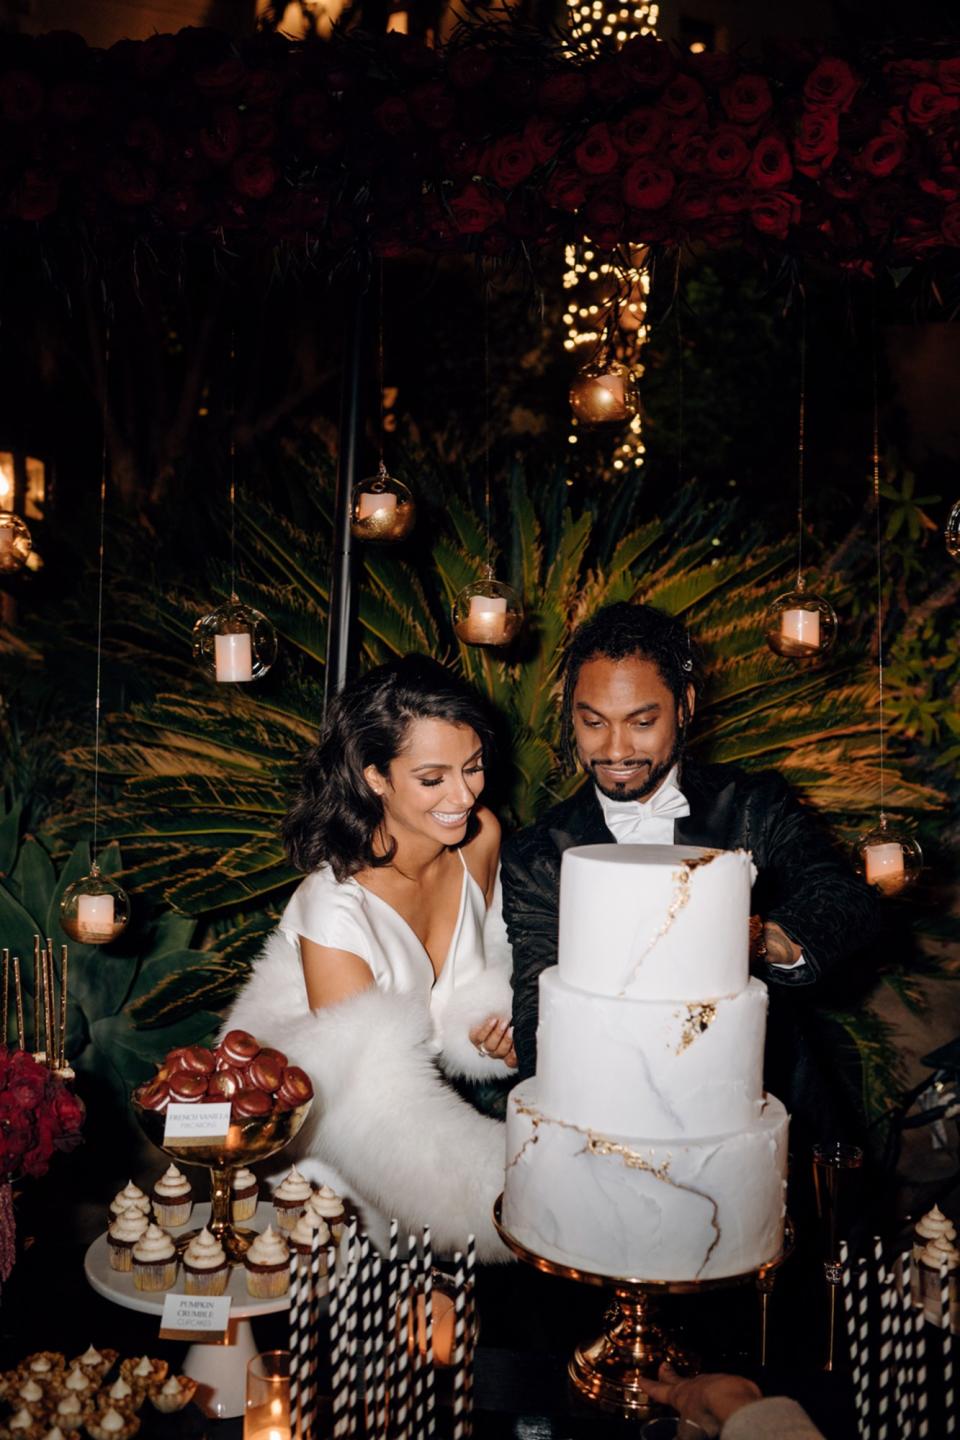 The wedding took place on Saturday, November 24, outside of Los Angeles and was an intimate affair that somehow, perhaps because it was right at the end of the Thanksgiving holiday, managed to fly under the radar.